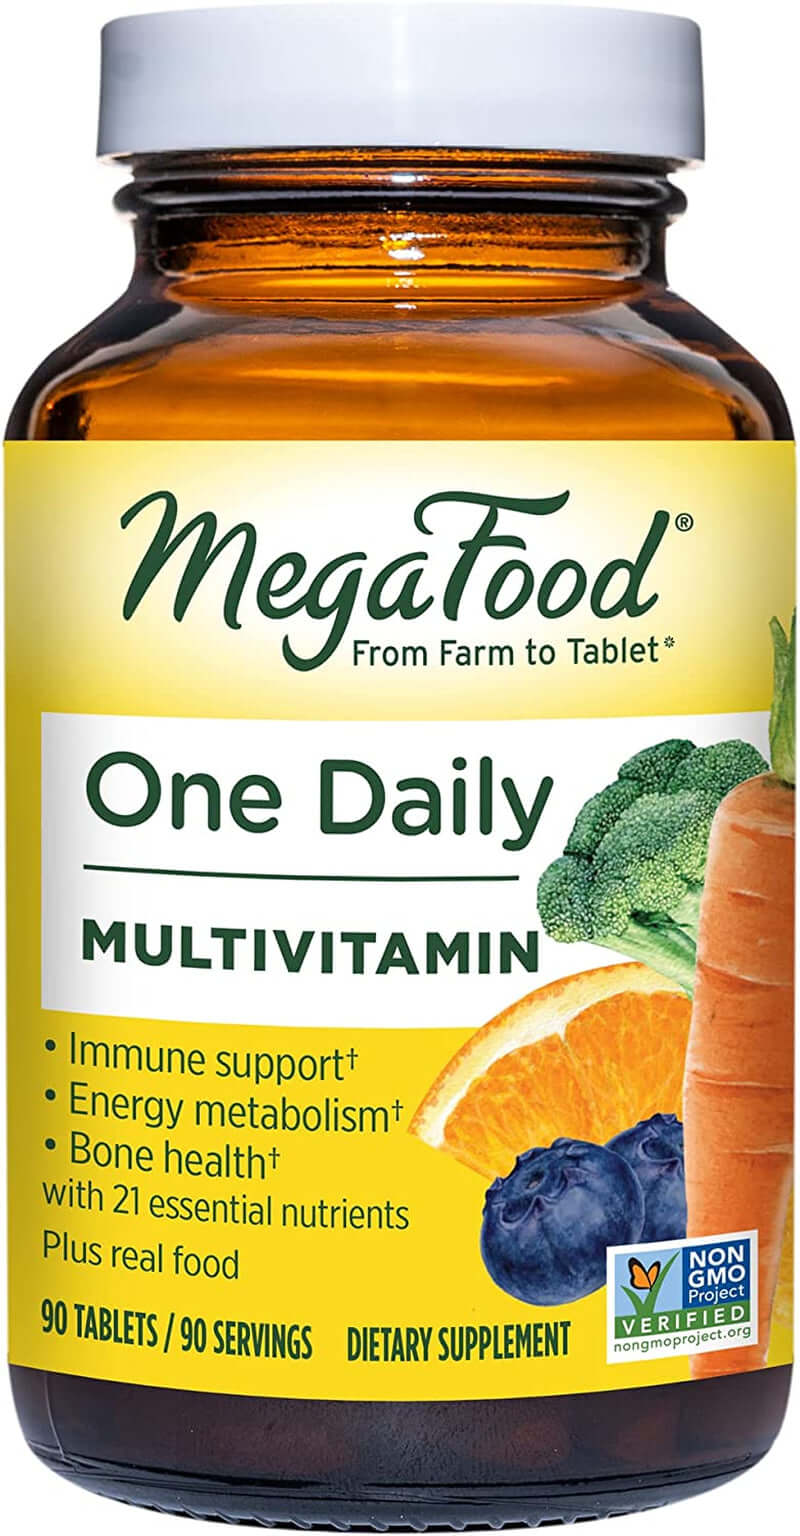 Megafood One Daily - Multivitamin and Mineral Supplement with B Vitamins, Vitamin C, Real Food and Added Nutrients - Gluten-Free, Vegetarian, and Made without Dairy and Soy - 90 Tabs - vitamenstore.com